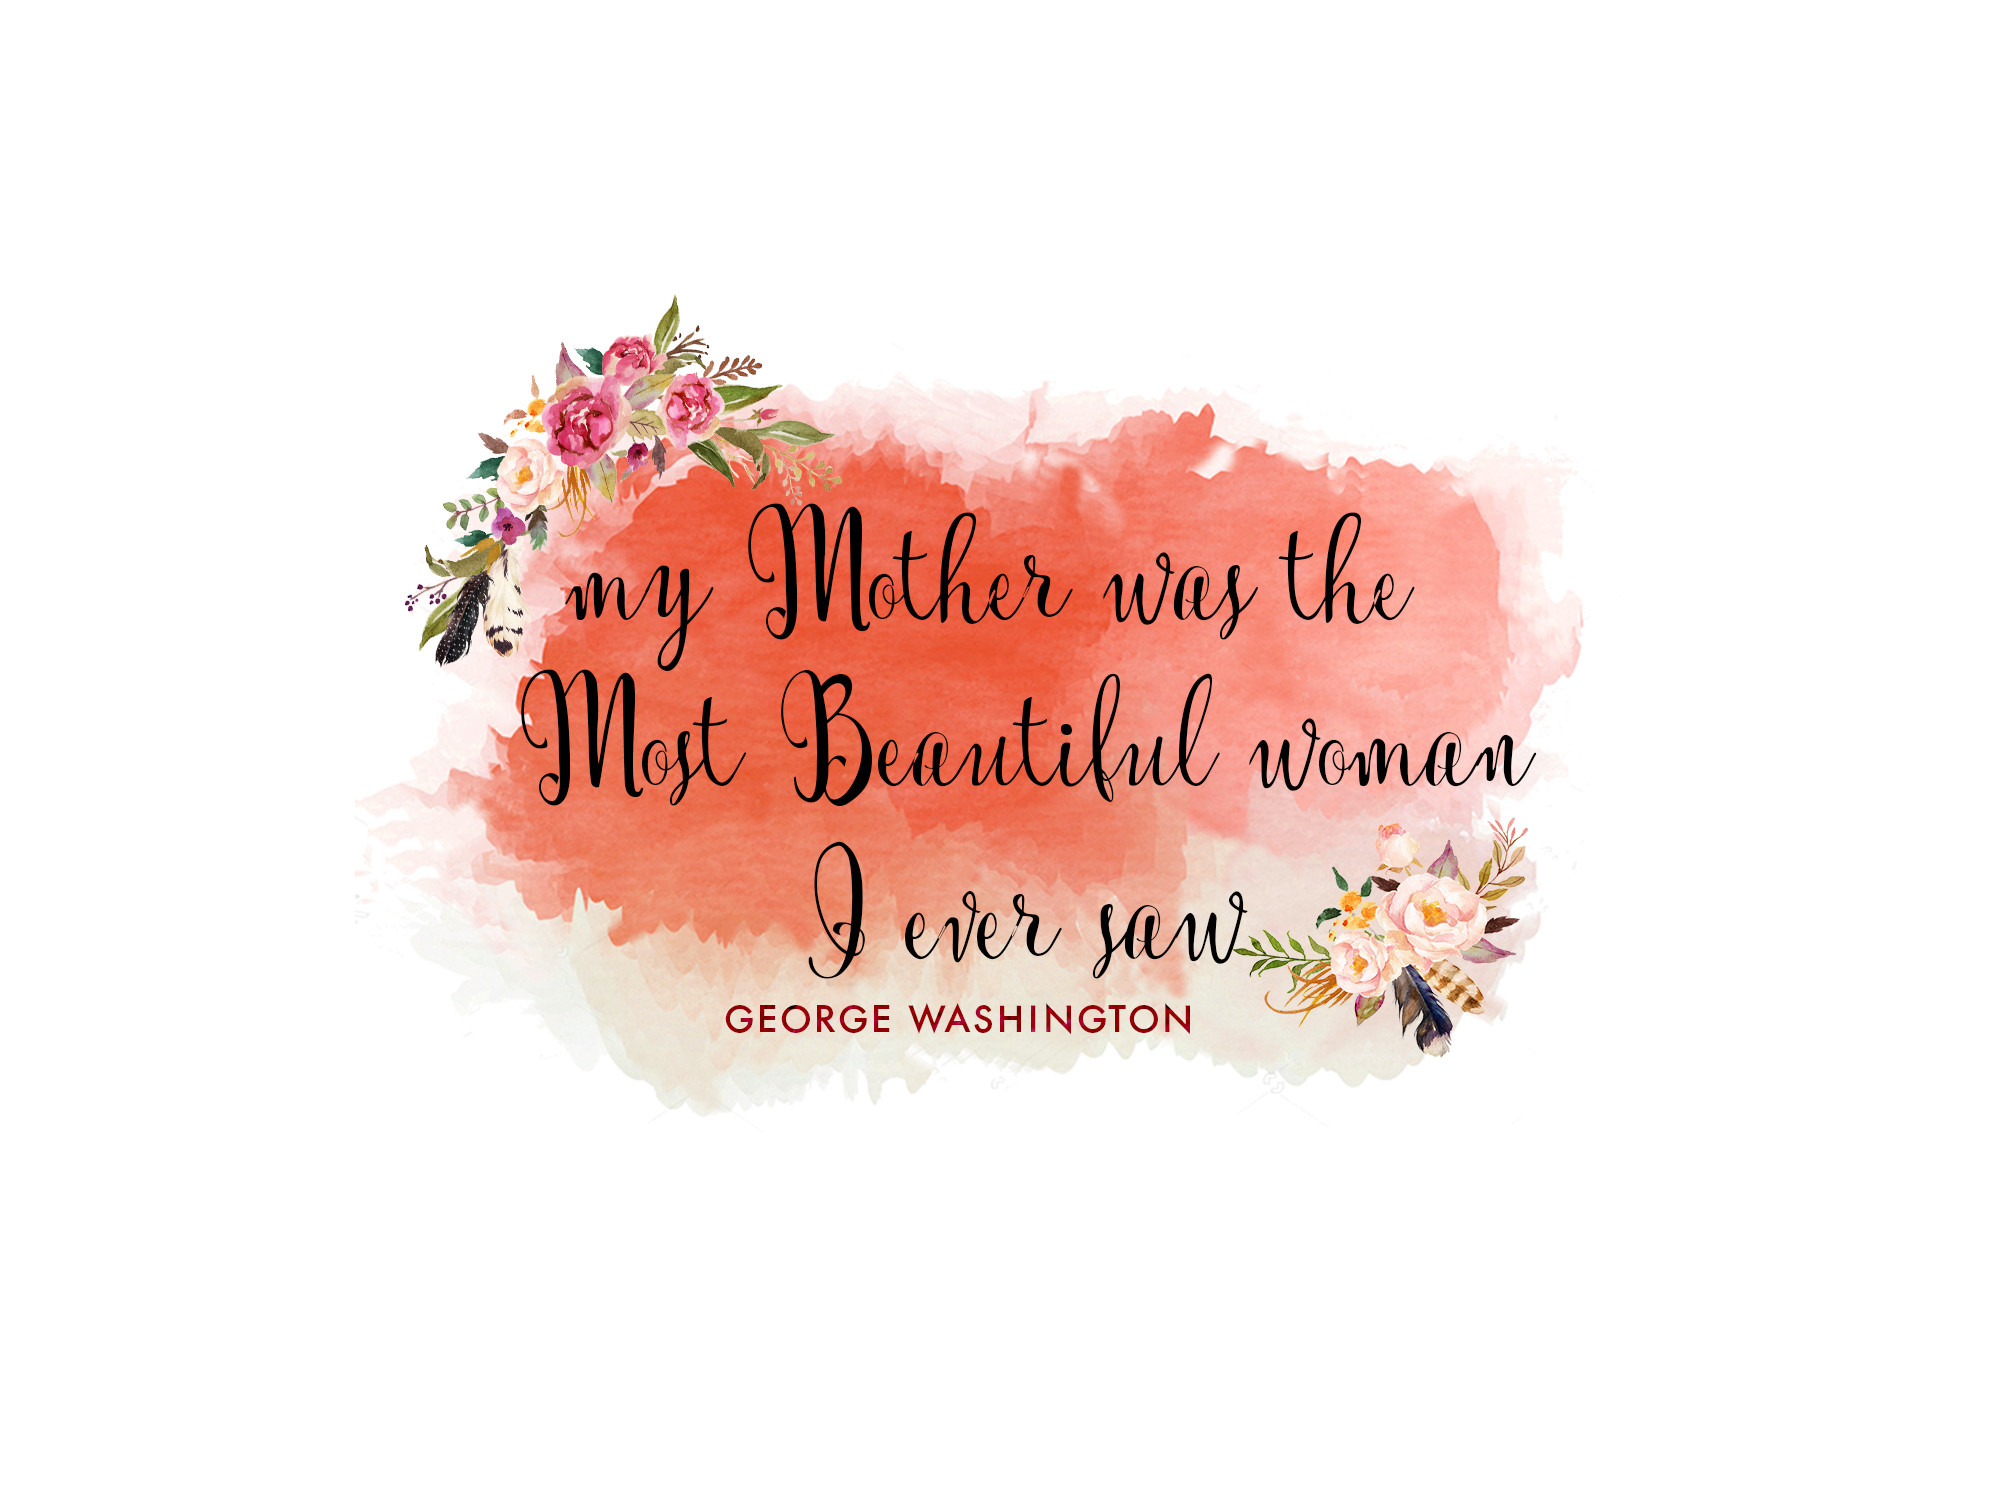 Printable Mothers Day Quotes
 Free Mother s Day Printable George Washington Quote